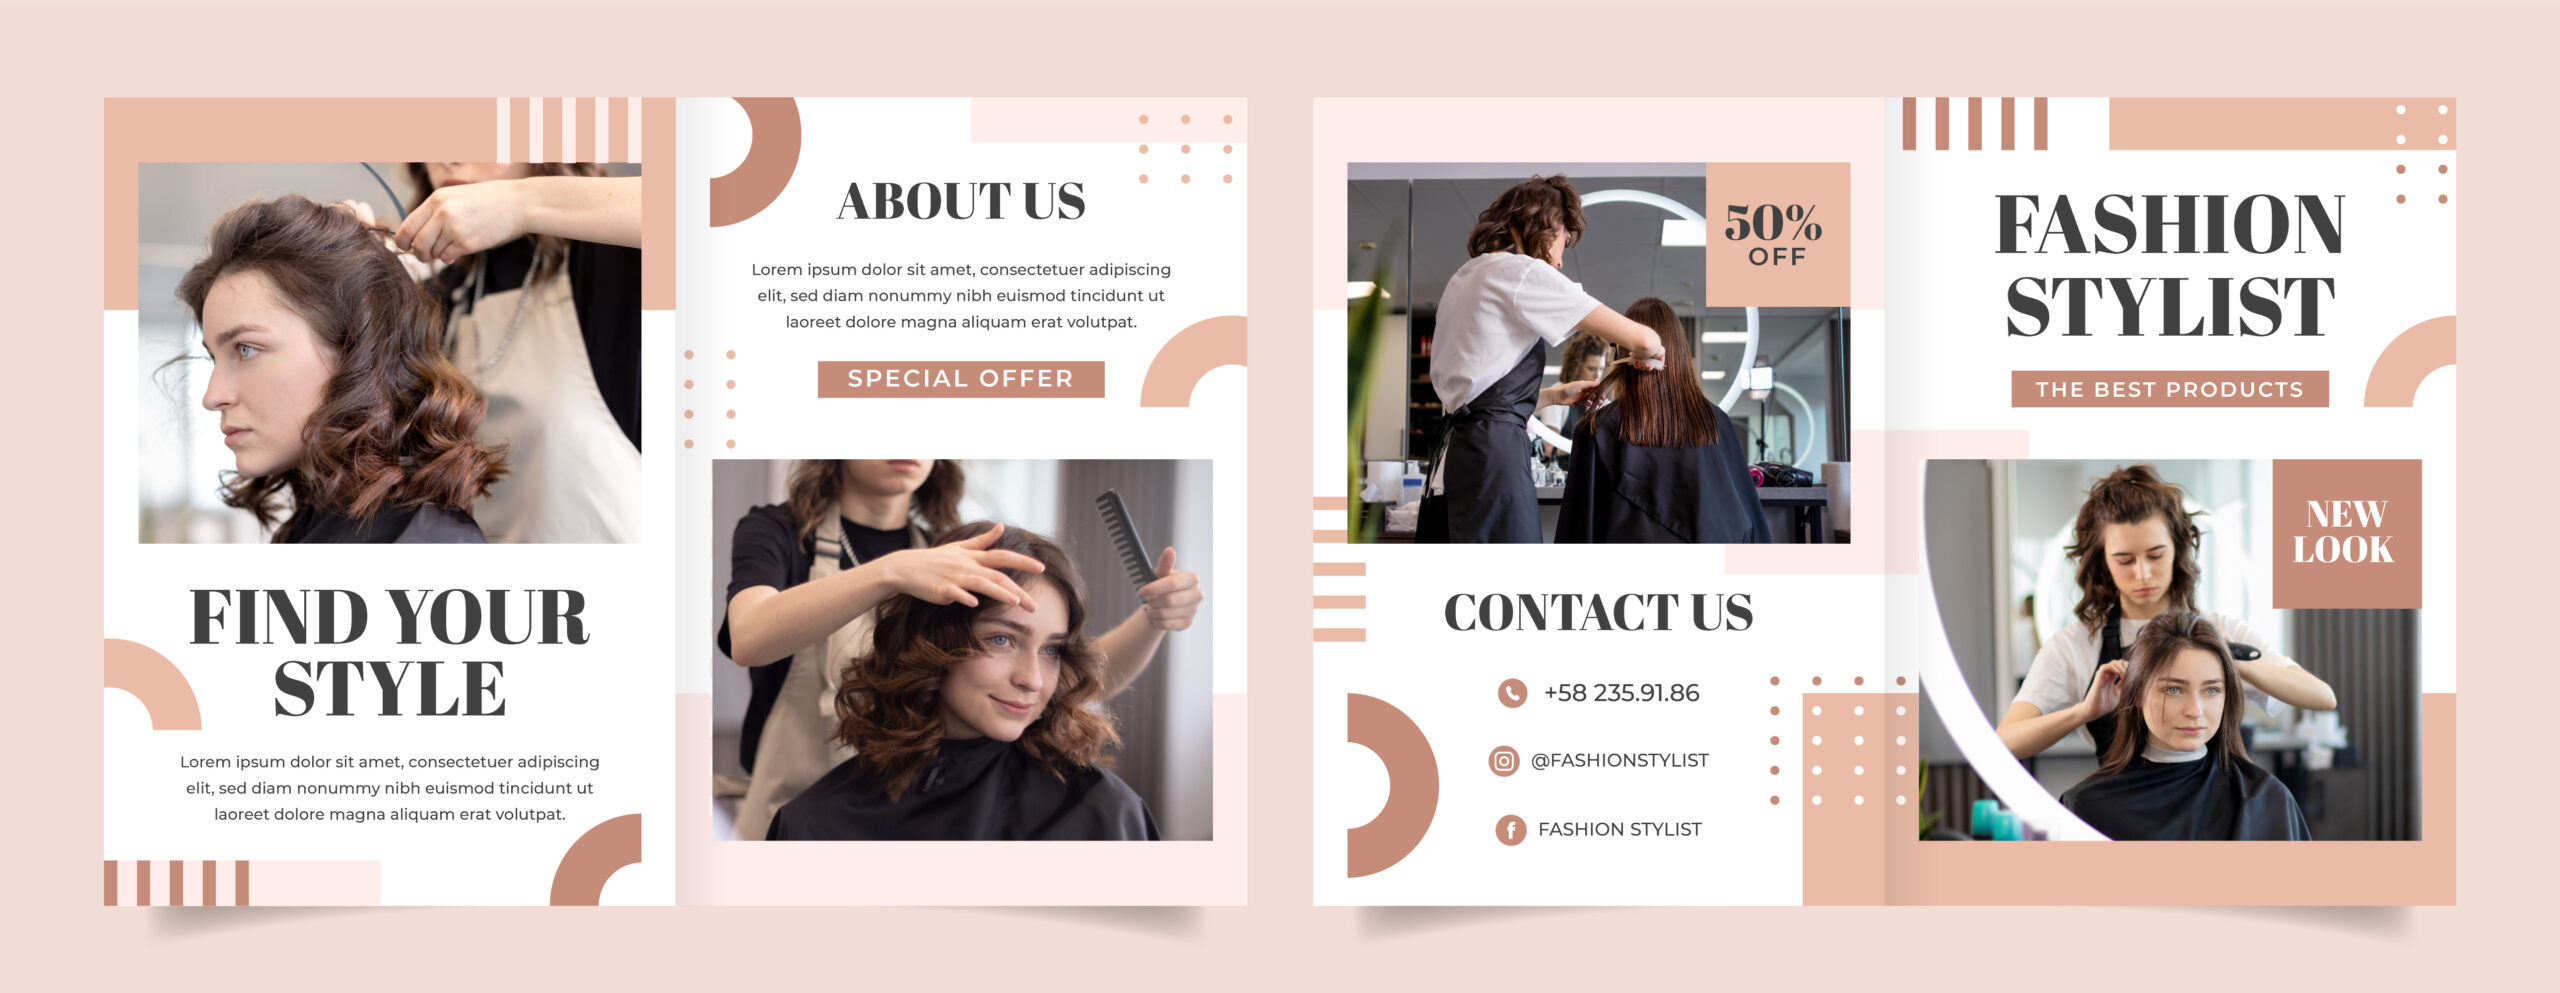 Get Started as a Hairstylist Why You Need a Hairstylist Portfolio (4) hairstylist portfolio - Get Started as a Hairstylist Why You Need a Hairstylist Portfolio 4 scaled - Get Started as a Hairstylist: Why You Need a Hairstylist Portfolio